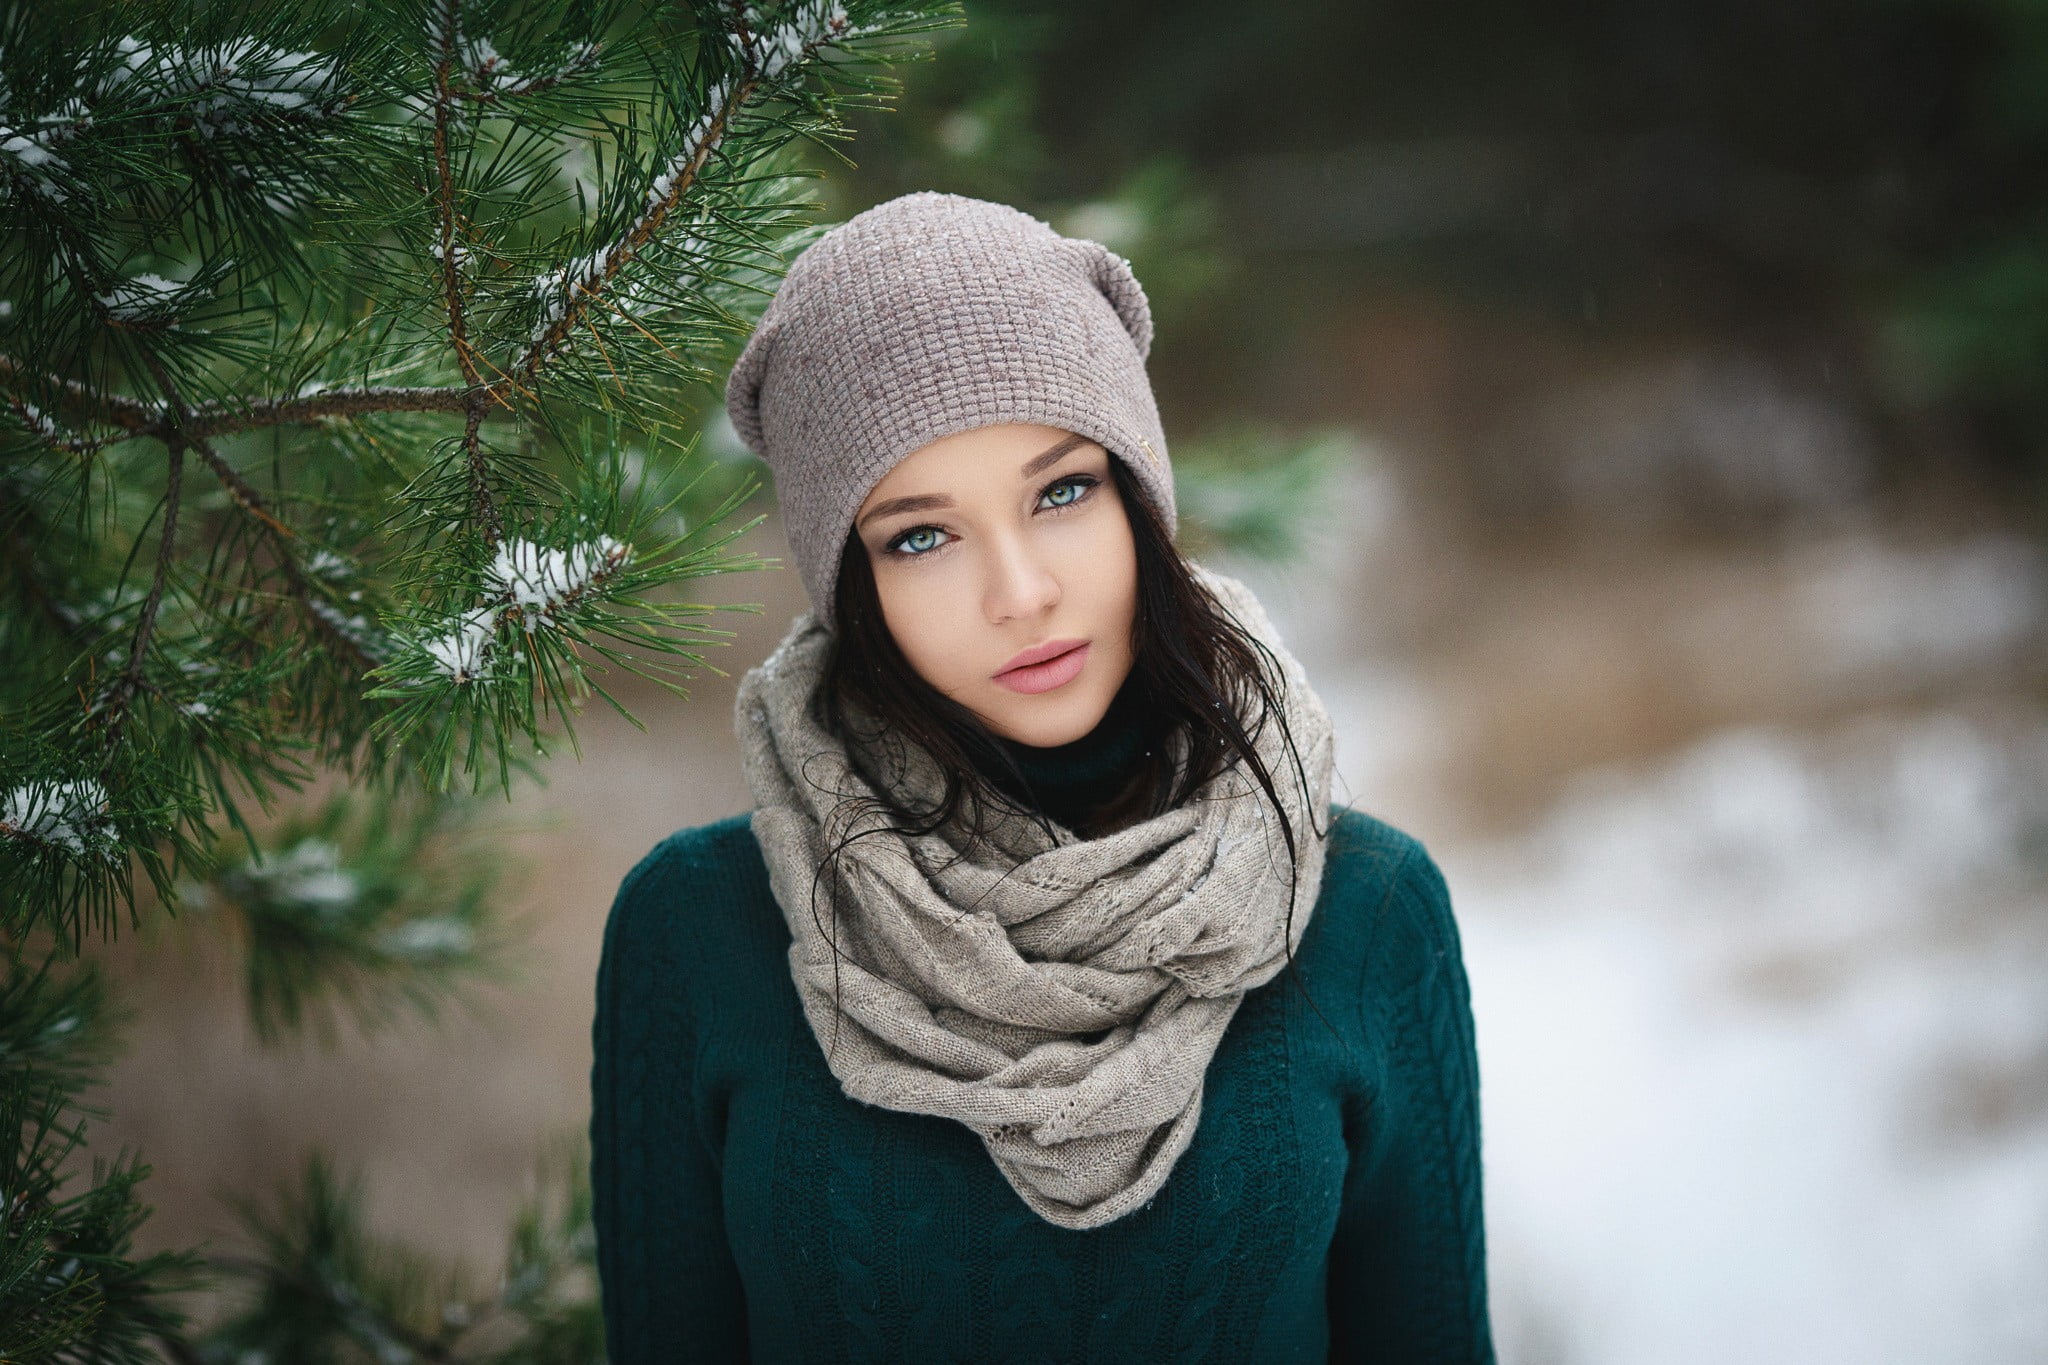 woman wearing grey knit cap and infinity scarf